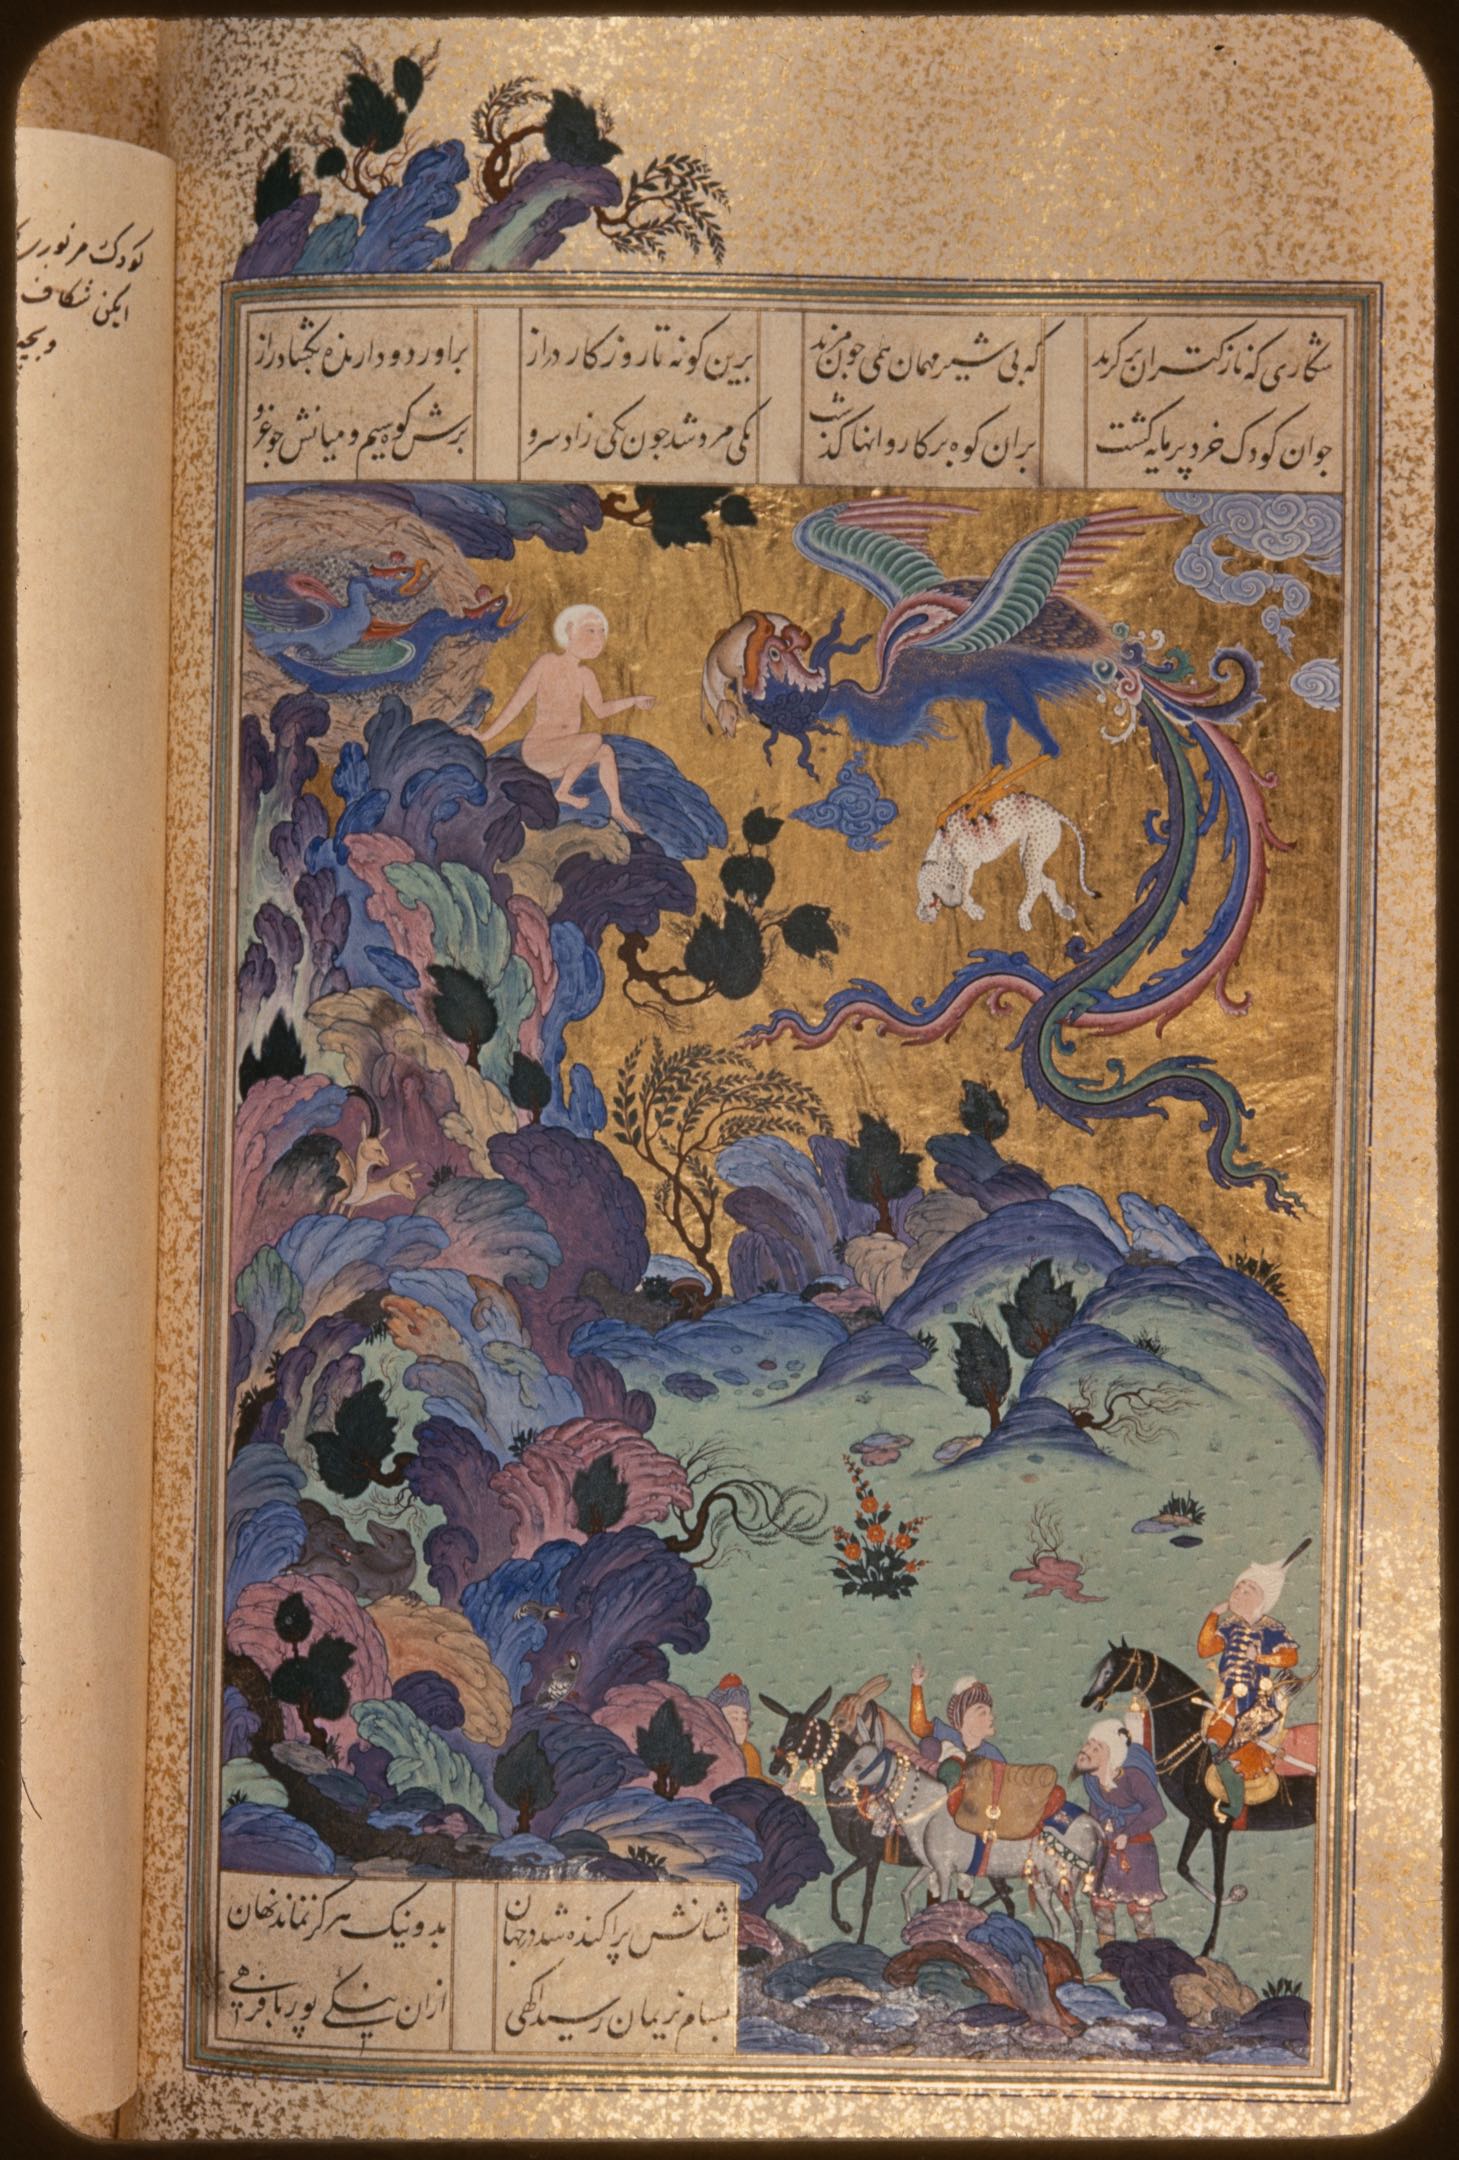 Zal is Sighted by a Caravan (Freer LTS1995.2.46), f. 63v from the Houghton Shahnama, shown in situ